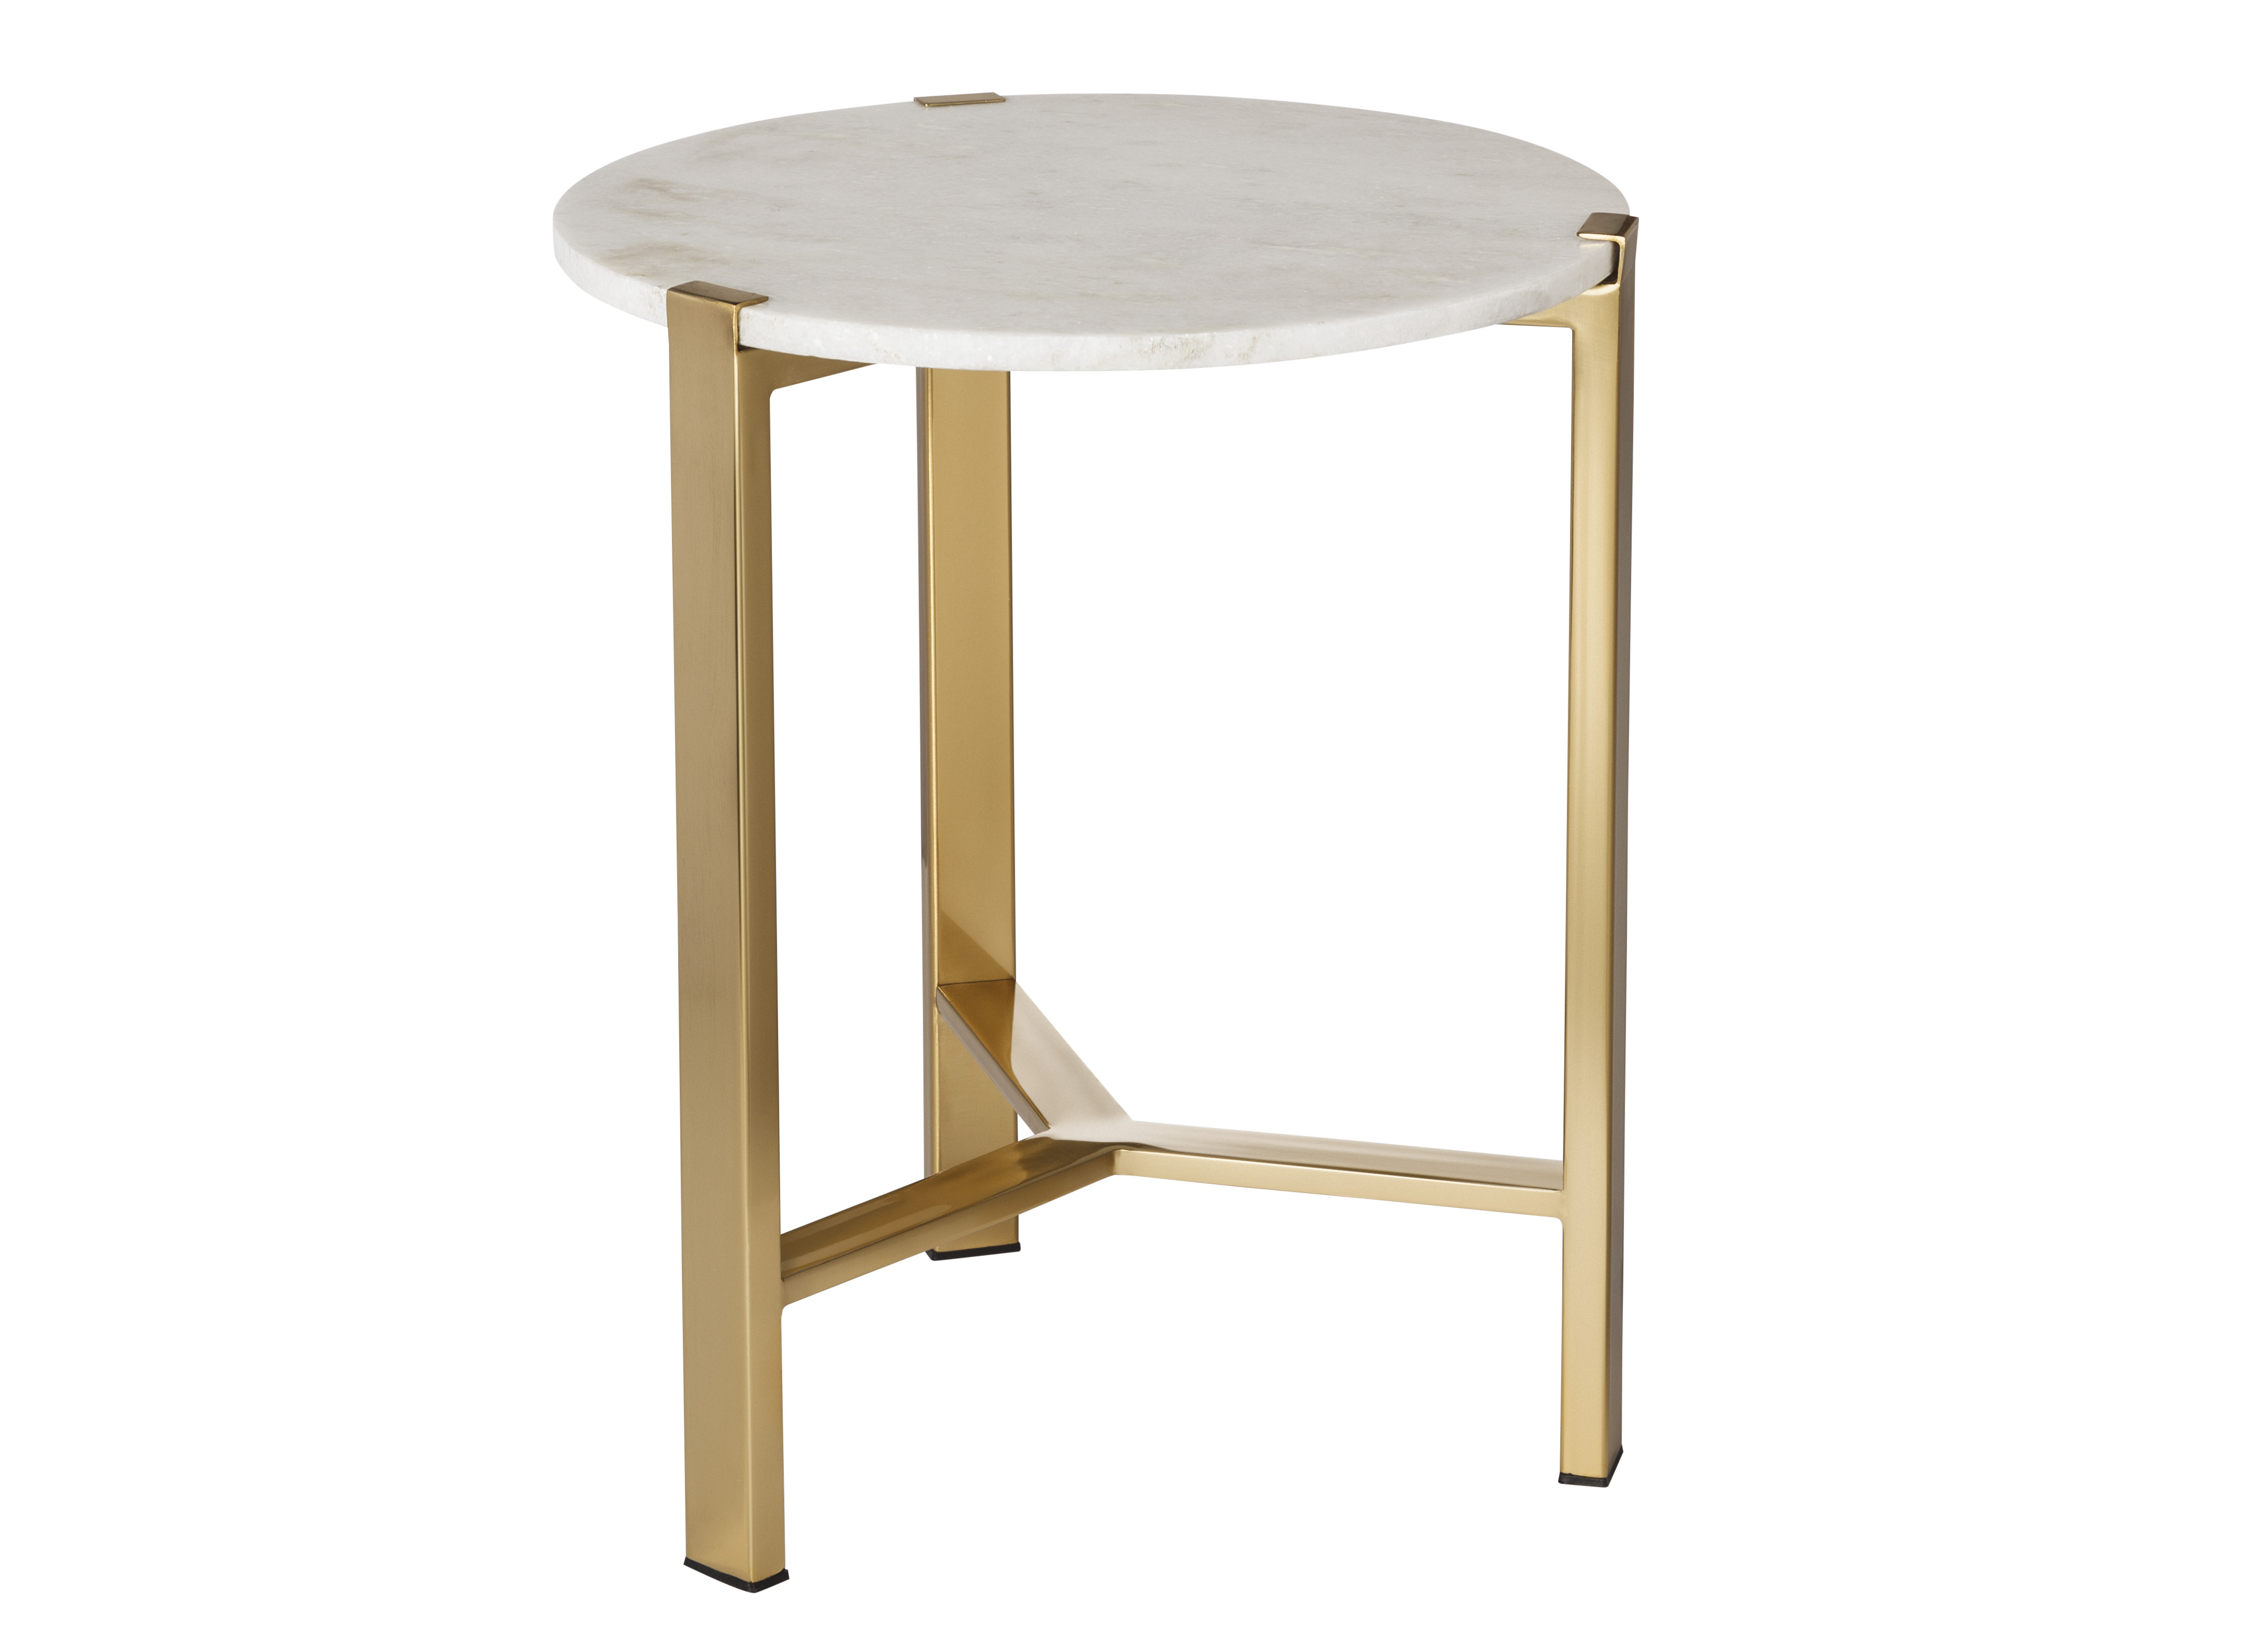 nate berkus target fall holiday look accent table marble top smoked glass round wood end outdoor concrete side trade furniture gold lamps french home goods coffee tables white